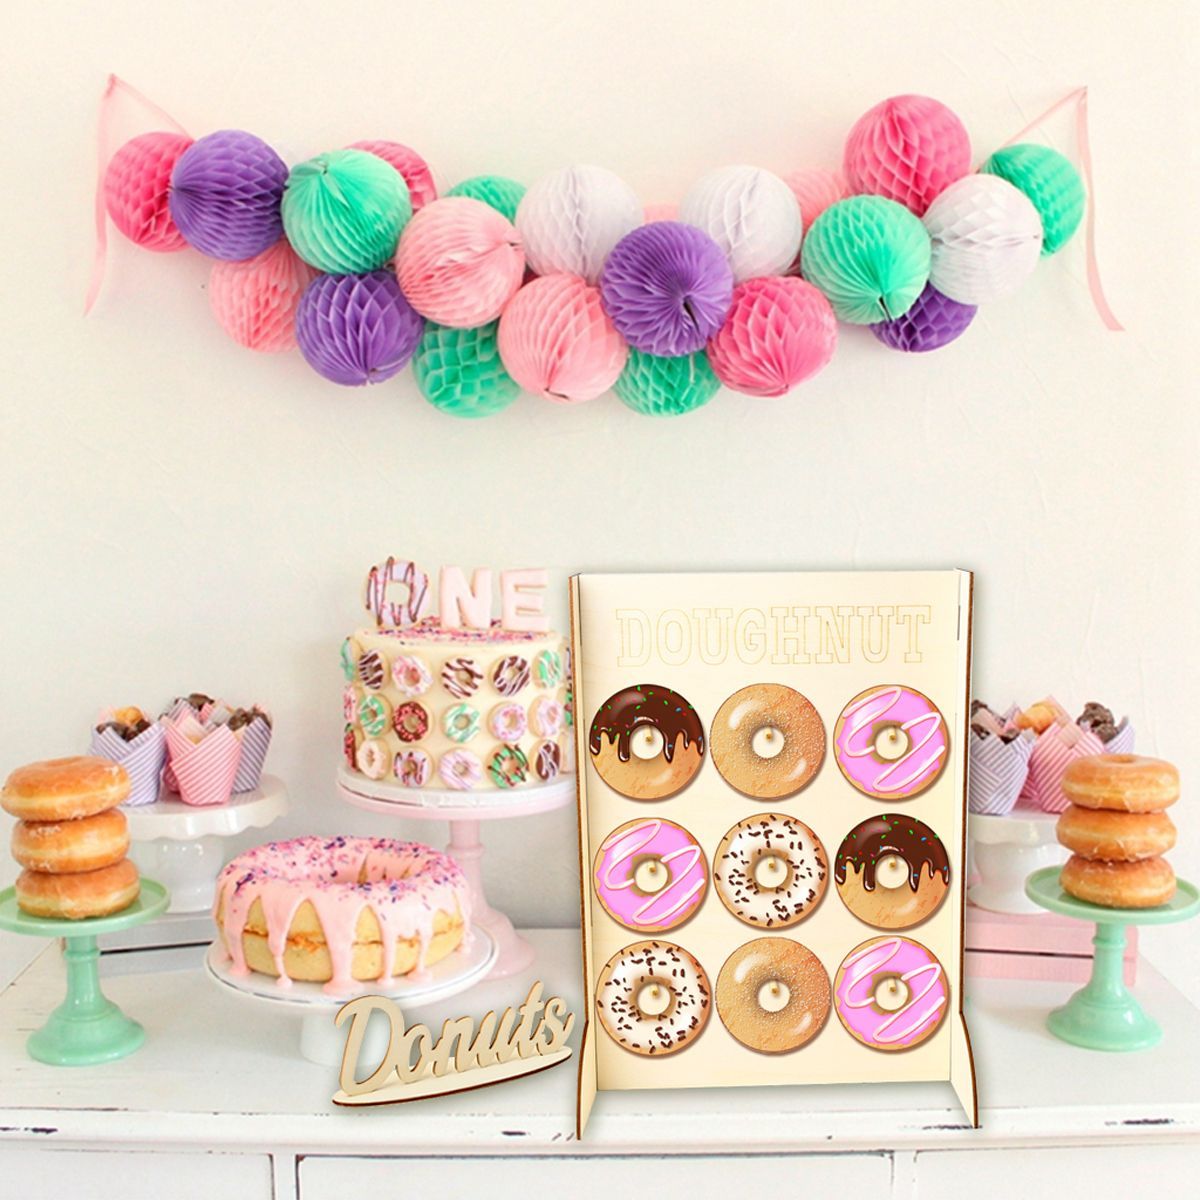 Wooden-9-Donut-Wall-Candy-Stand-Table-Holder-Home-Decor-Wedding-Party-Supplies-Decorations-1638369